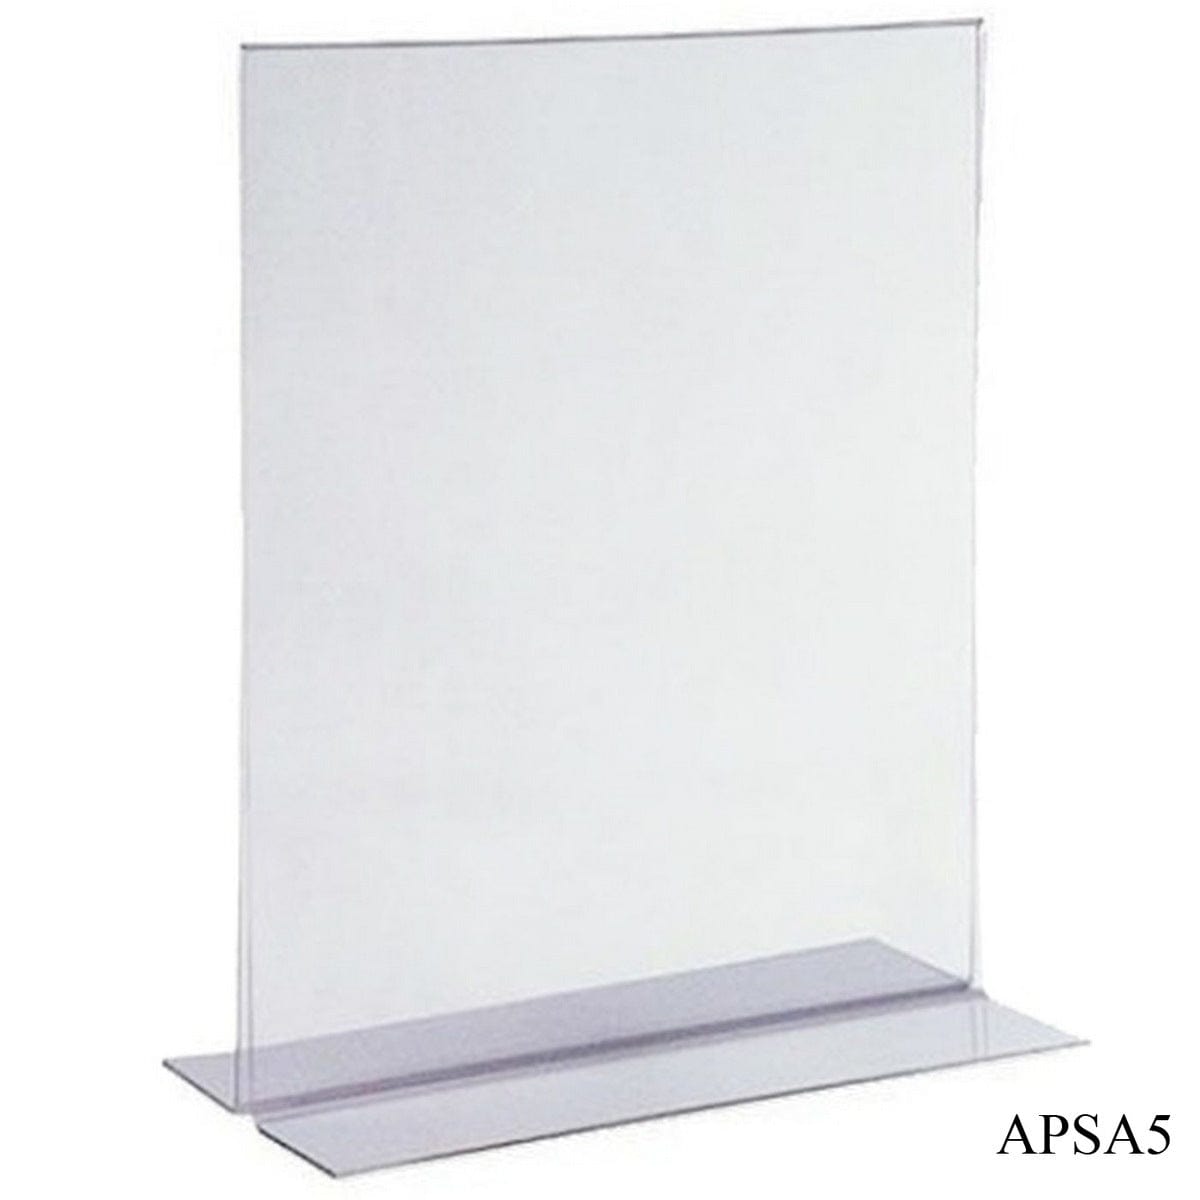 jags-mumbai Acrylic Display Stands Sleek and Modern: The Acrylic Paper Stand for A5-sized Documents and Photos 2mm T A5 6x8.5